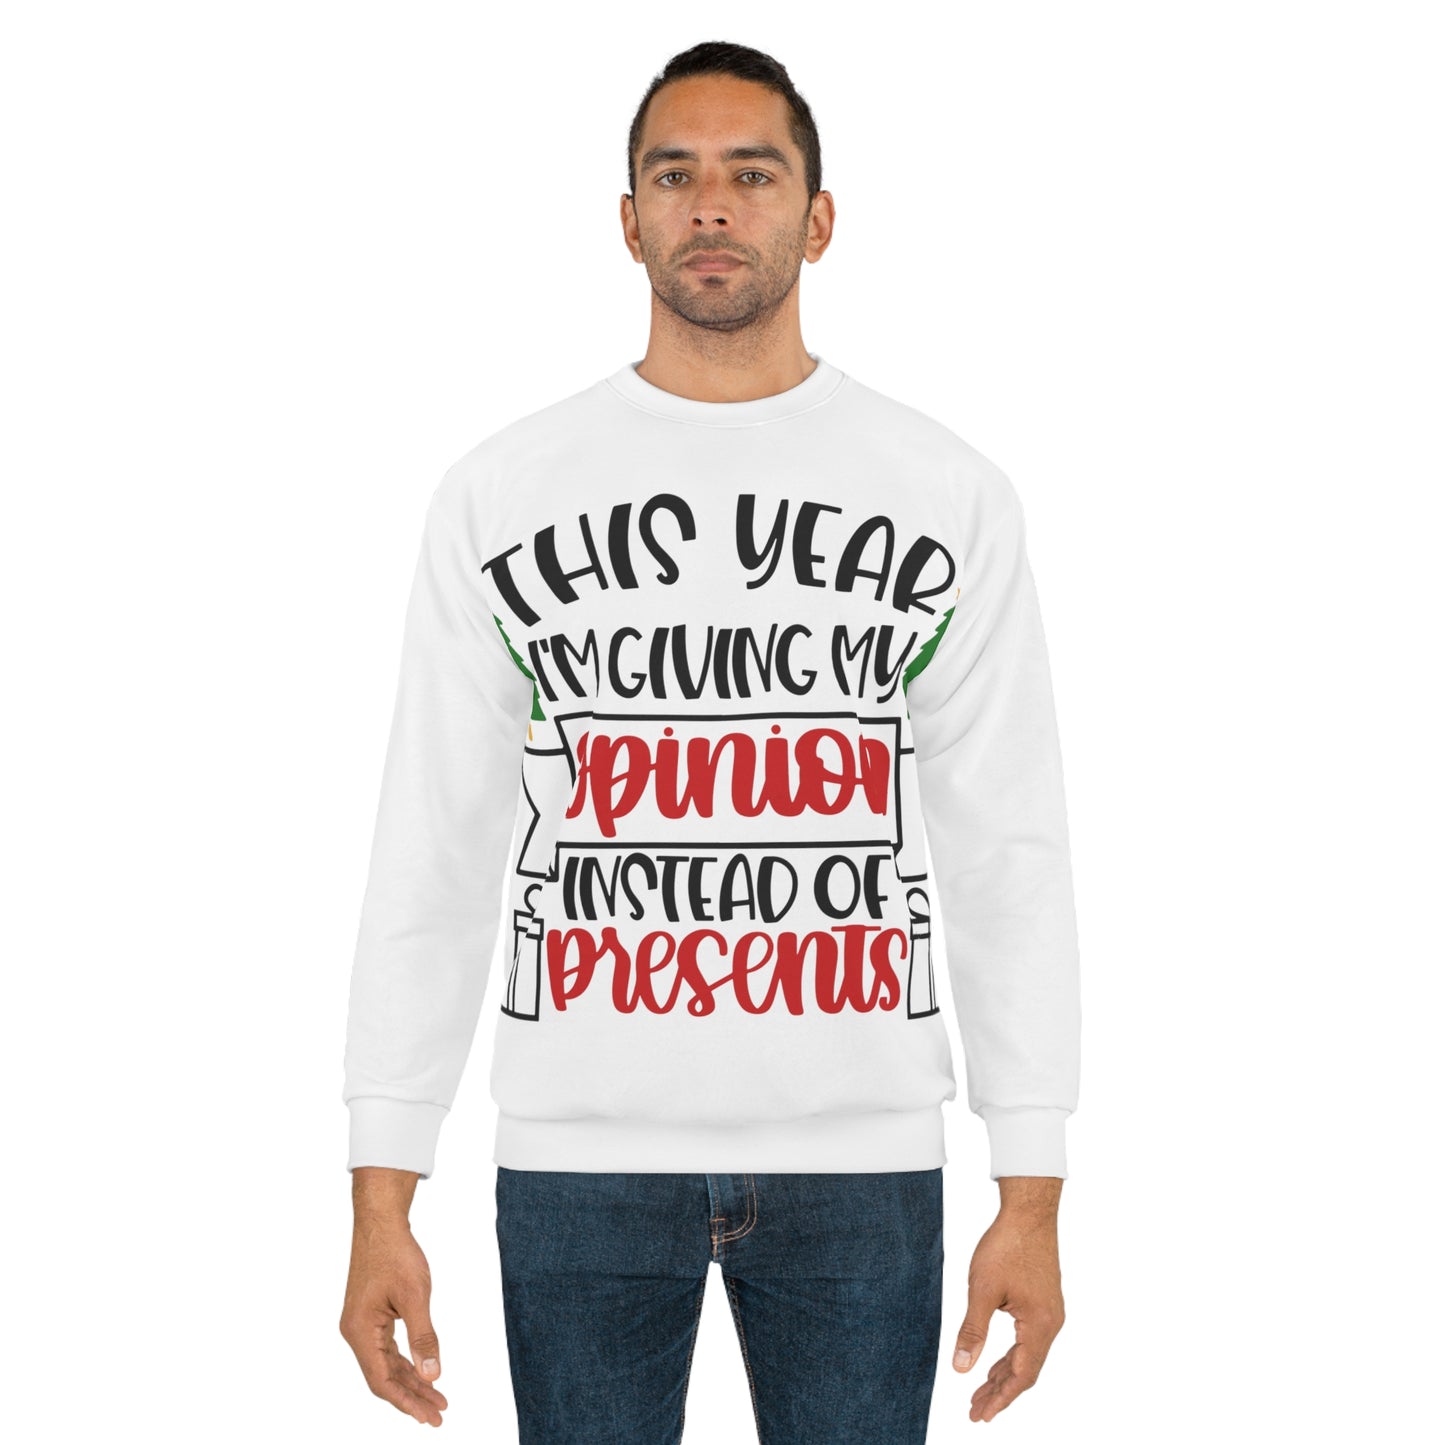 This Year I'm giving my opinion instead of presents Unisex Sweatshirt (AOP)